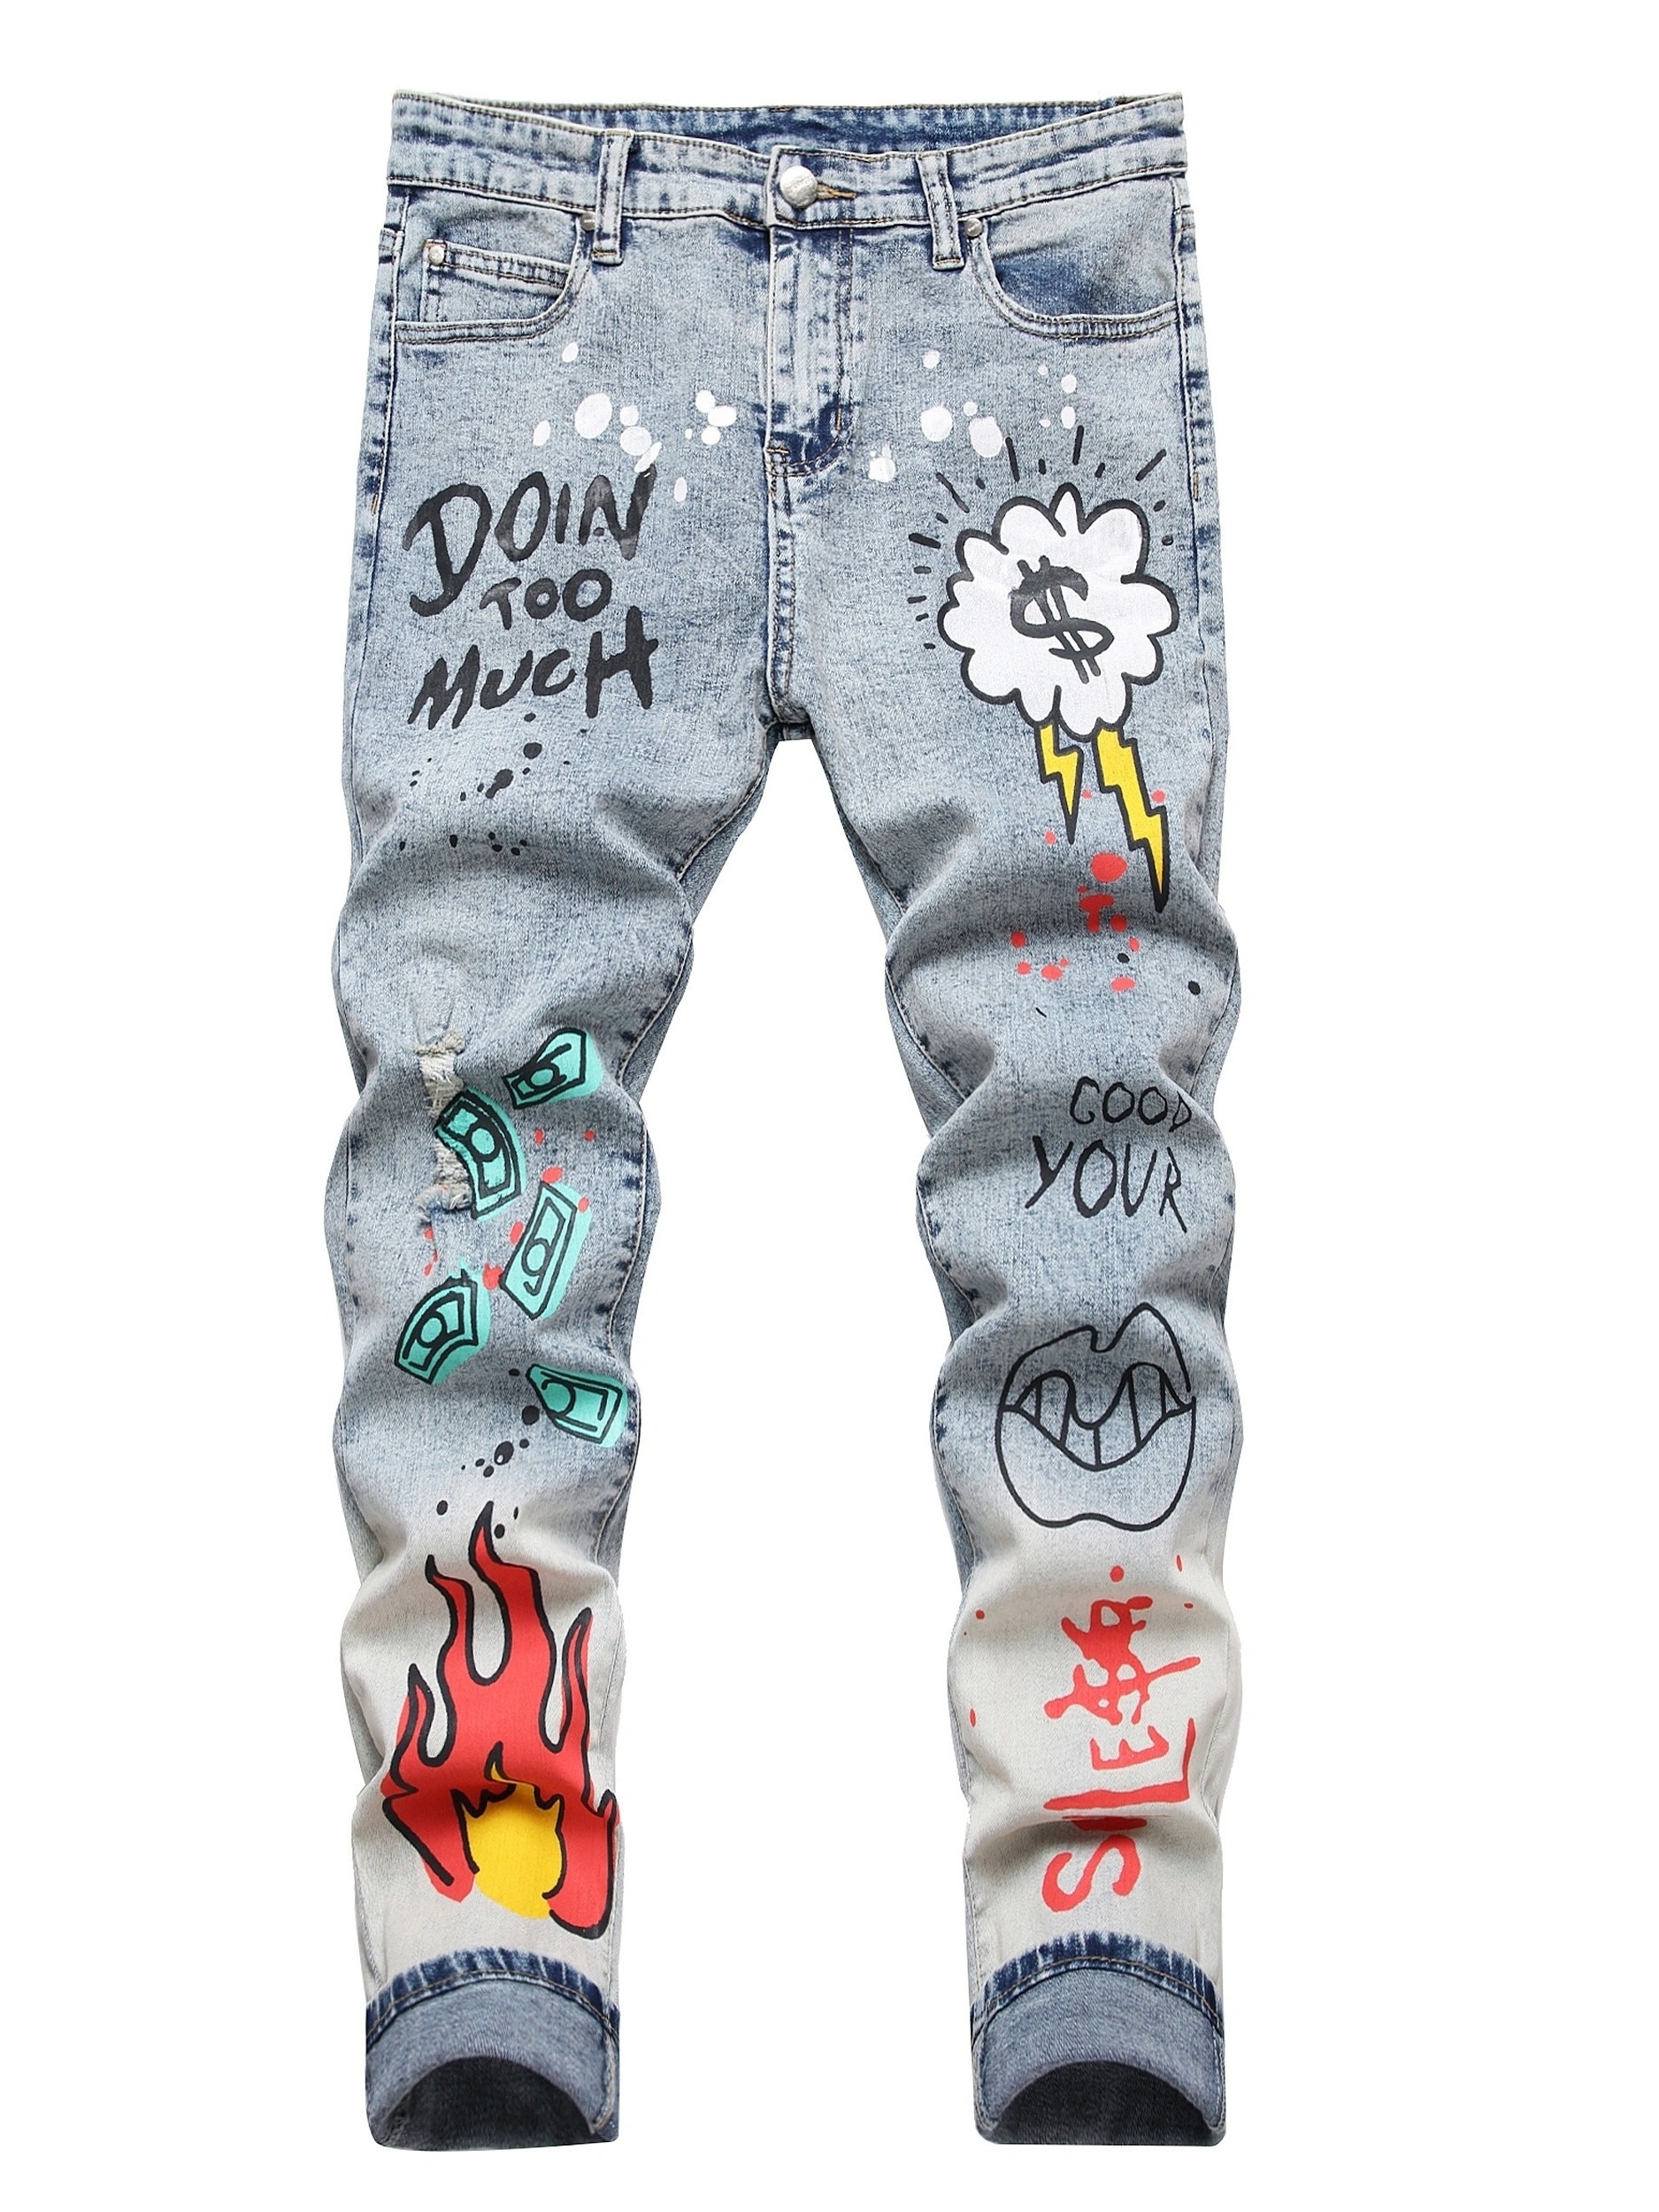 paint stained jeans - Google Search  Edgy jeans, Denim and supply, Paint  splatter jeans